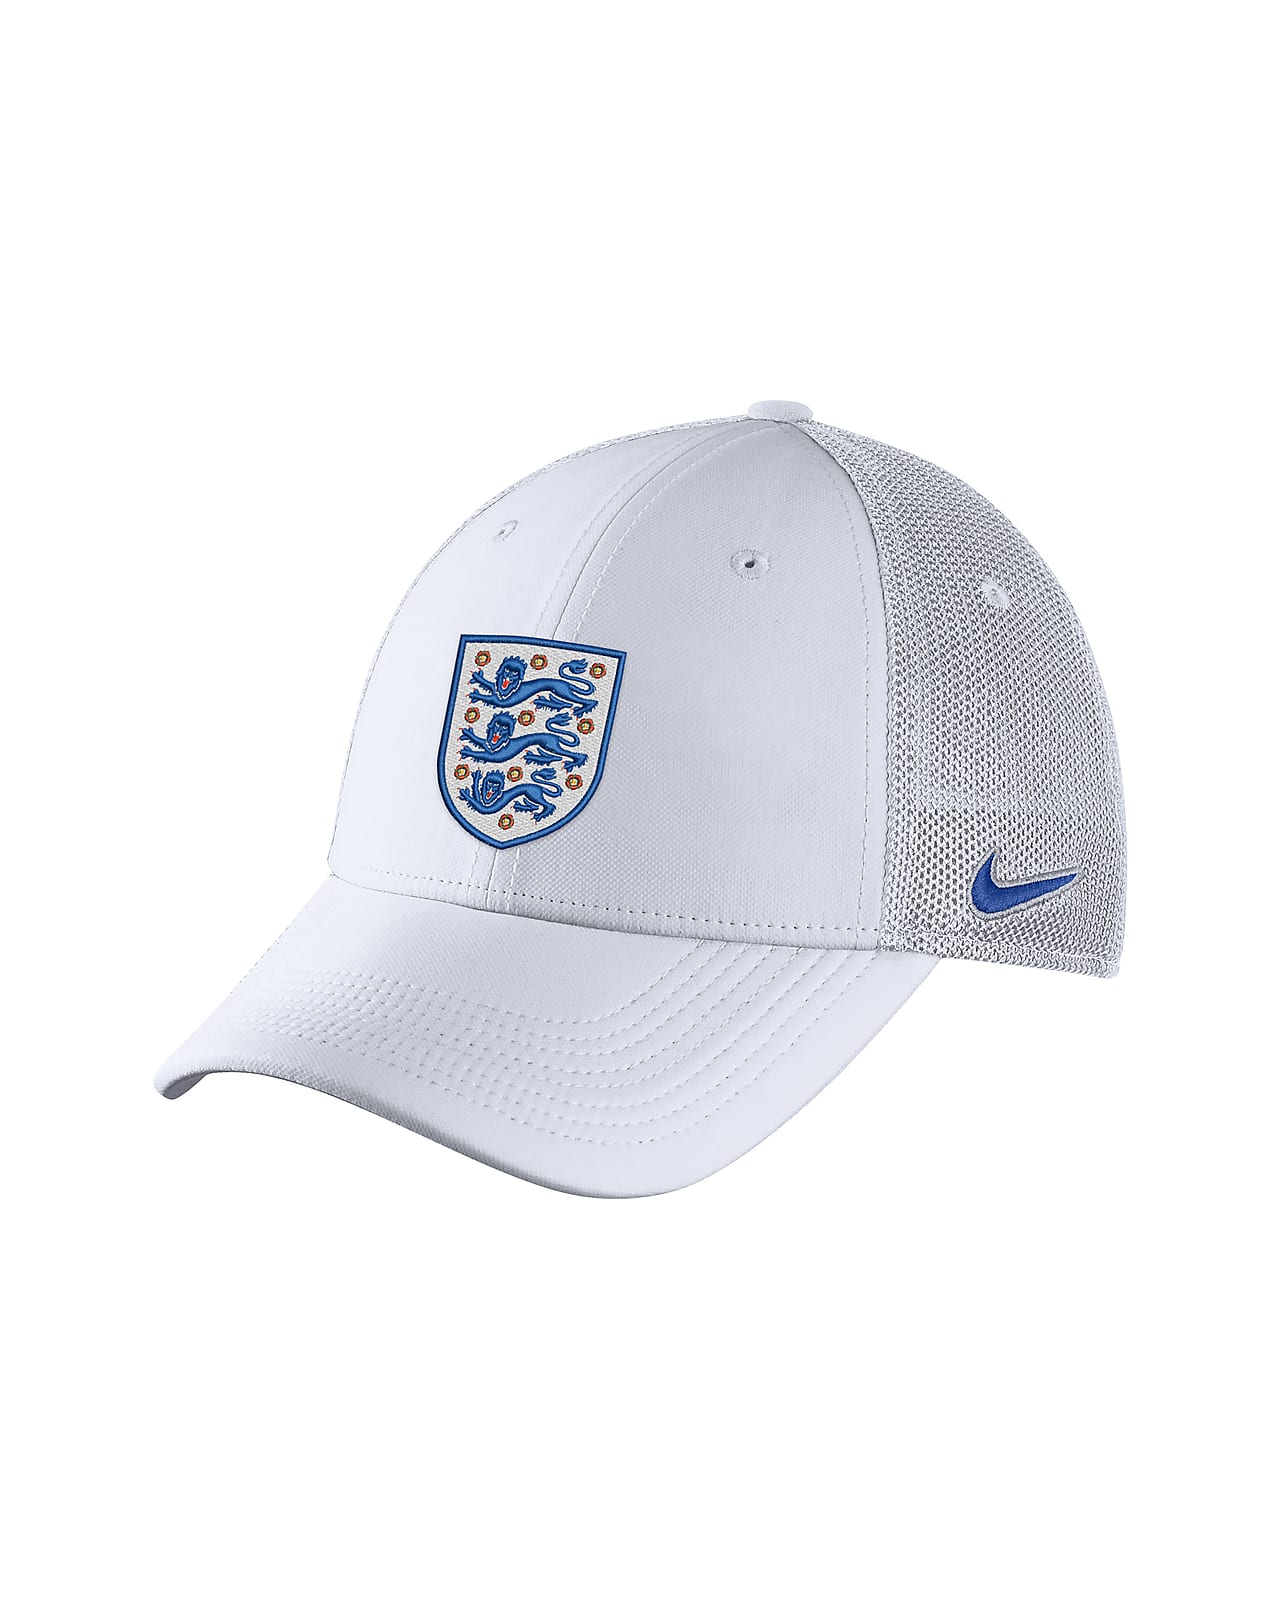 England Legacy91 Men's Nike AeroBill Fitted Hat